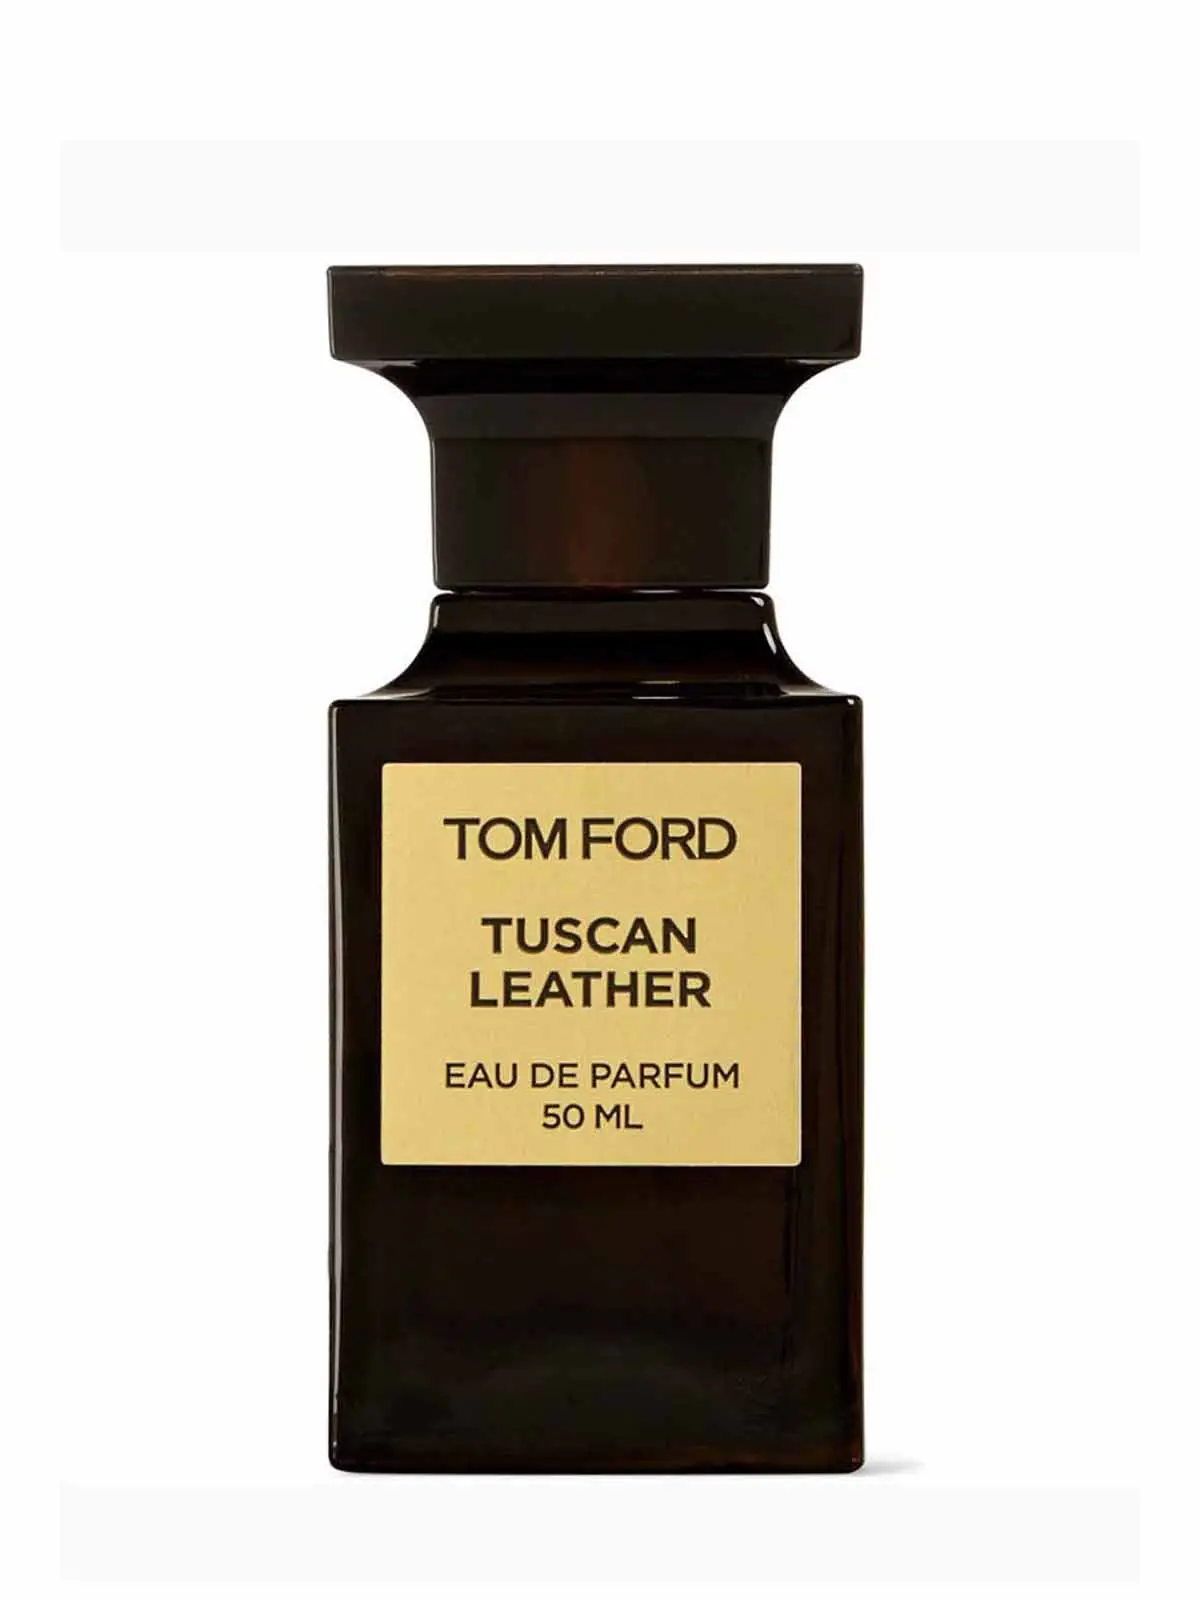 Tom Ford Tuscan Leather EDP [Unboxed] - noseunbox